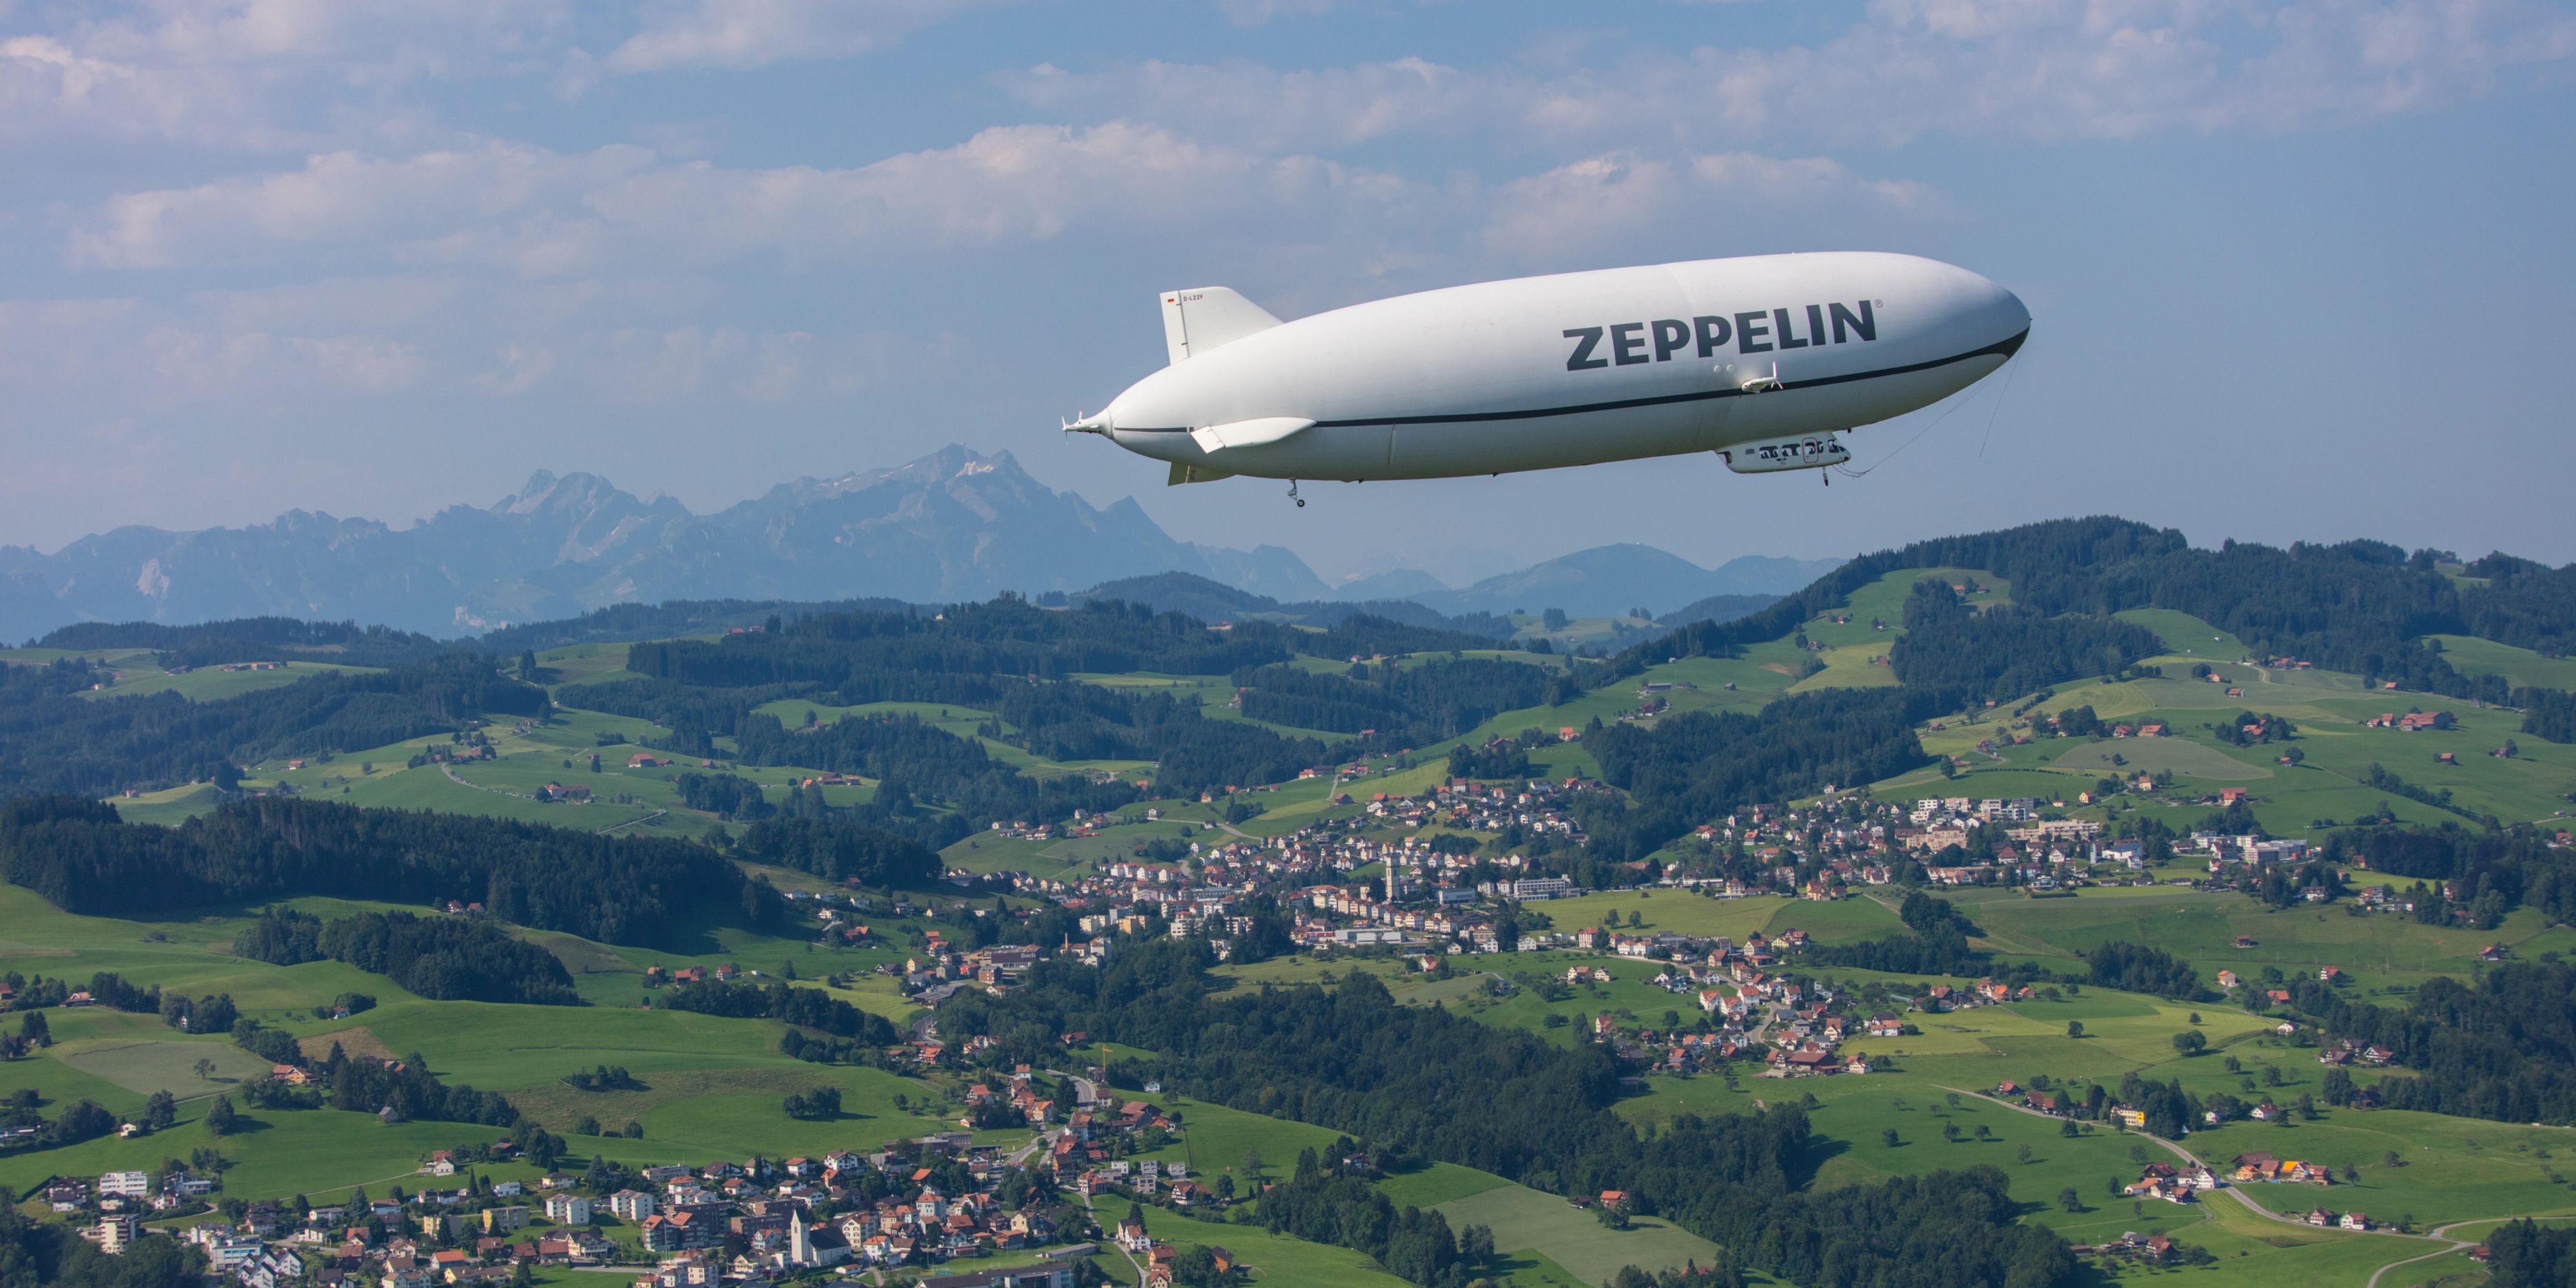 Experience the unique Zeppelin feeling and spectacular views of the Lake Constance region. A scenic flight with the Zeppelin is an unforgettable experience. Choose from 12 different flight routes above Lake Constance and discover the world's unique sightseeing experience at an altitude of 300 metres.